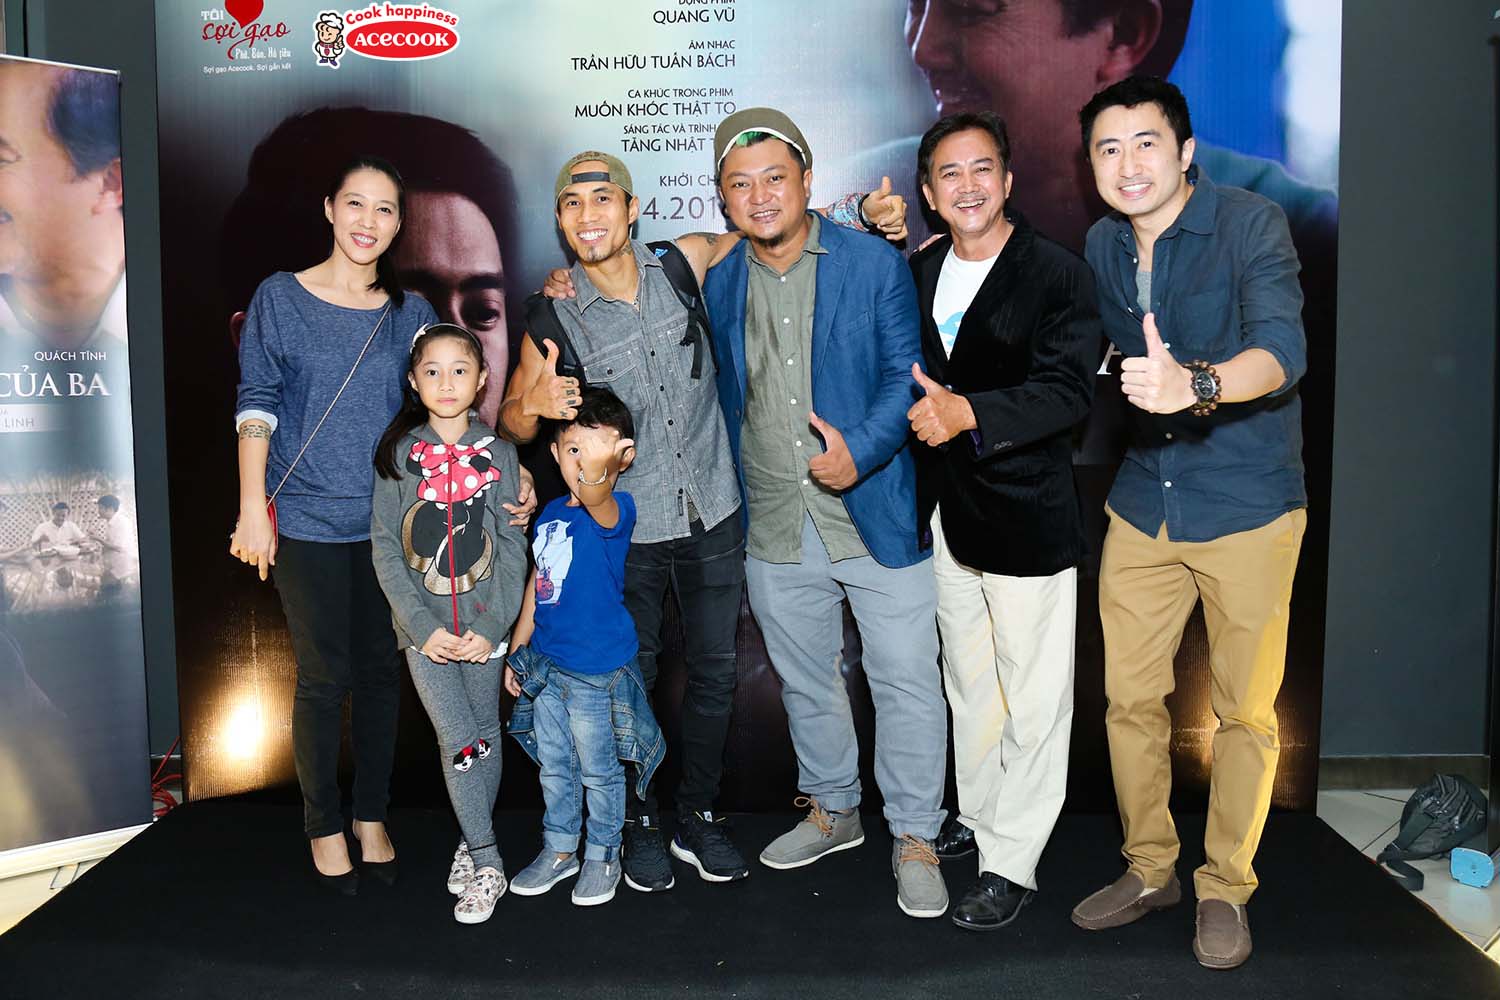 (From the right: protagonists David Tran, Quach Tinh, Director Phan Gia Nhat Linh)